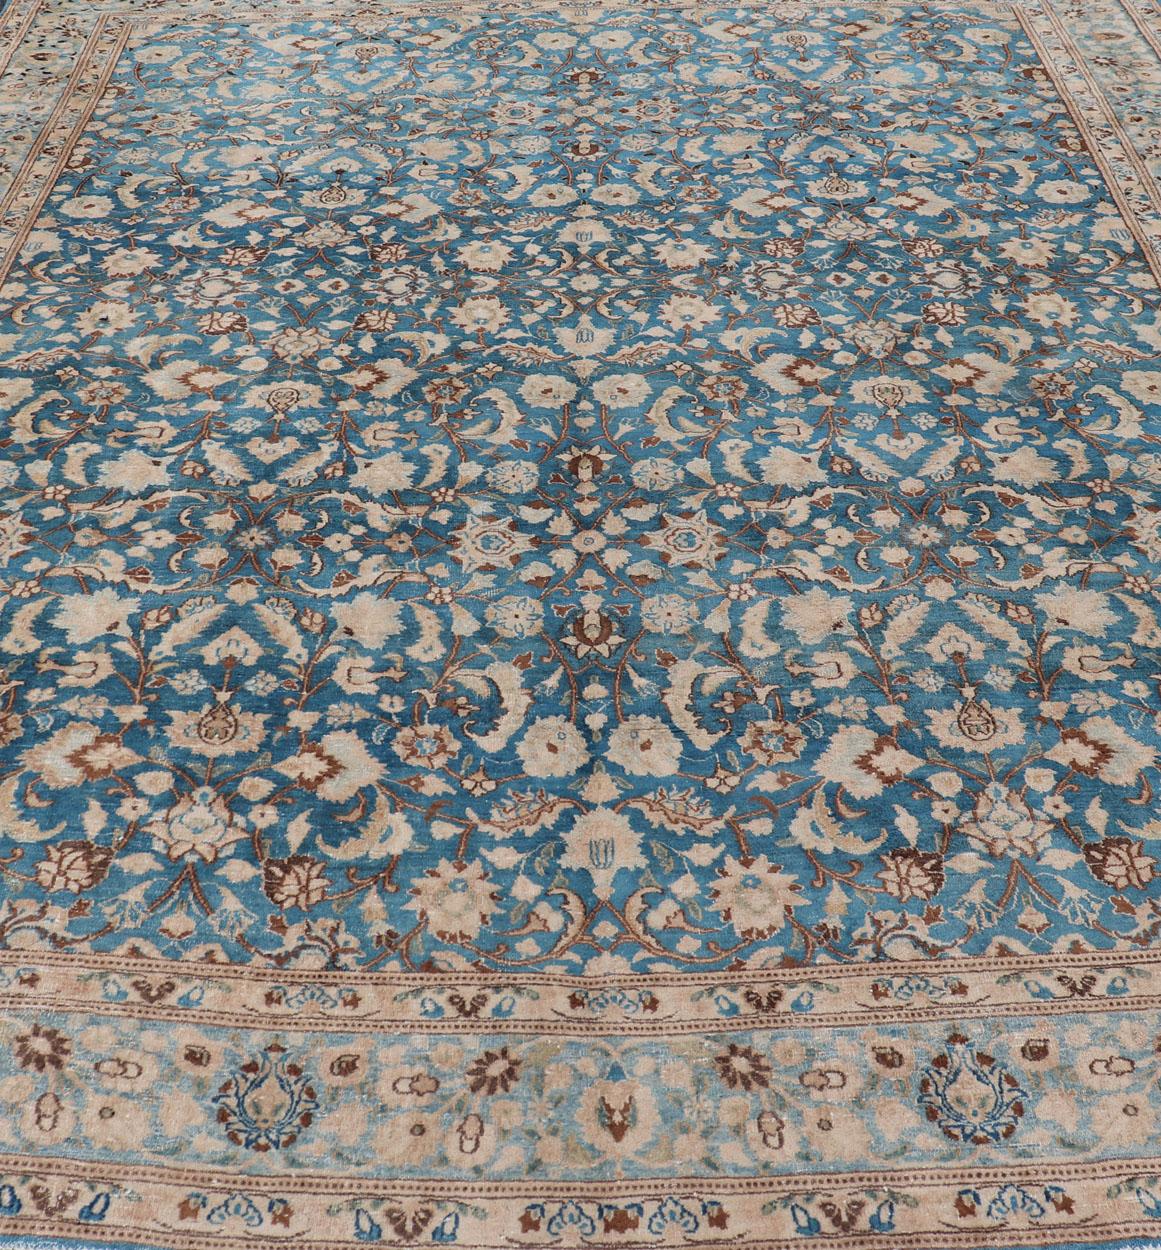 Turquoise Blue Background Antique Persian Khorassan Rug with Light Blue Border 2